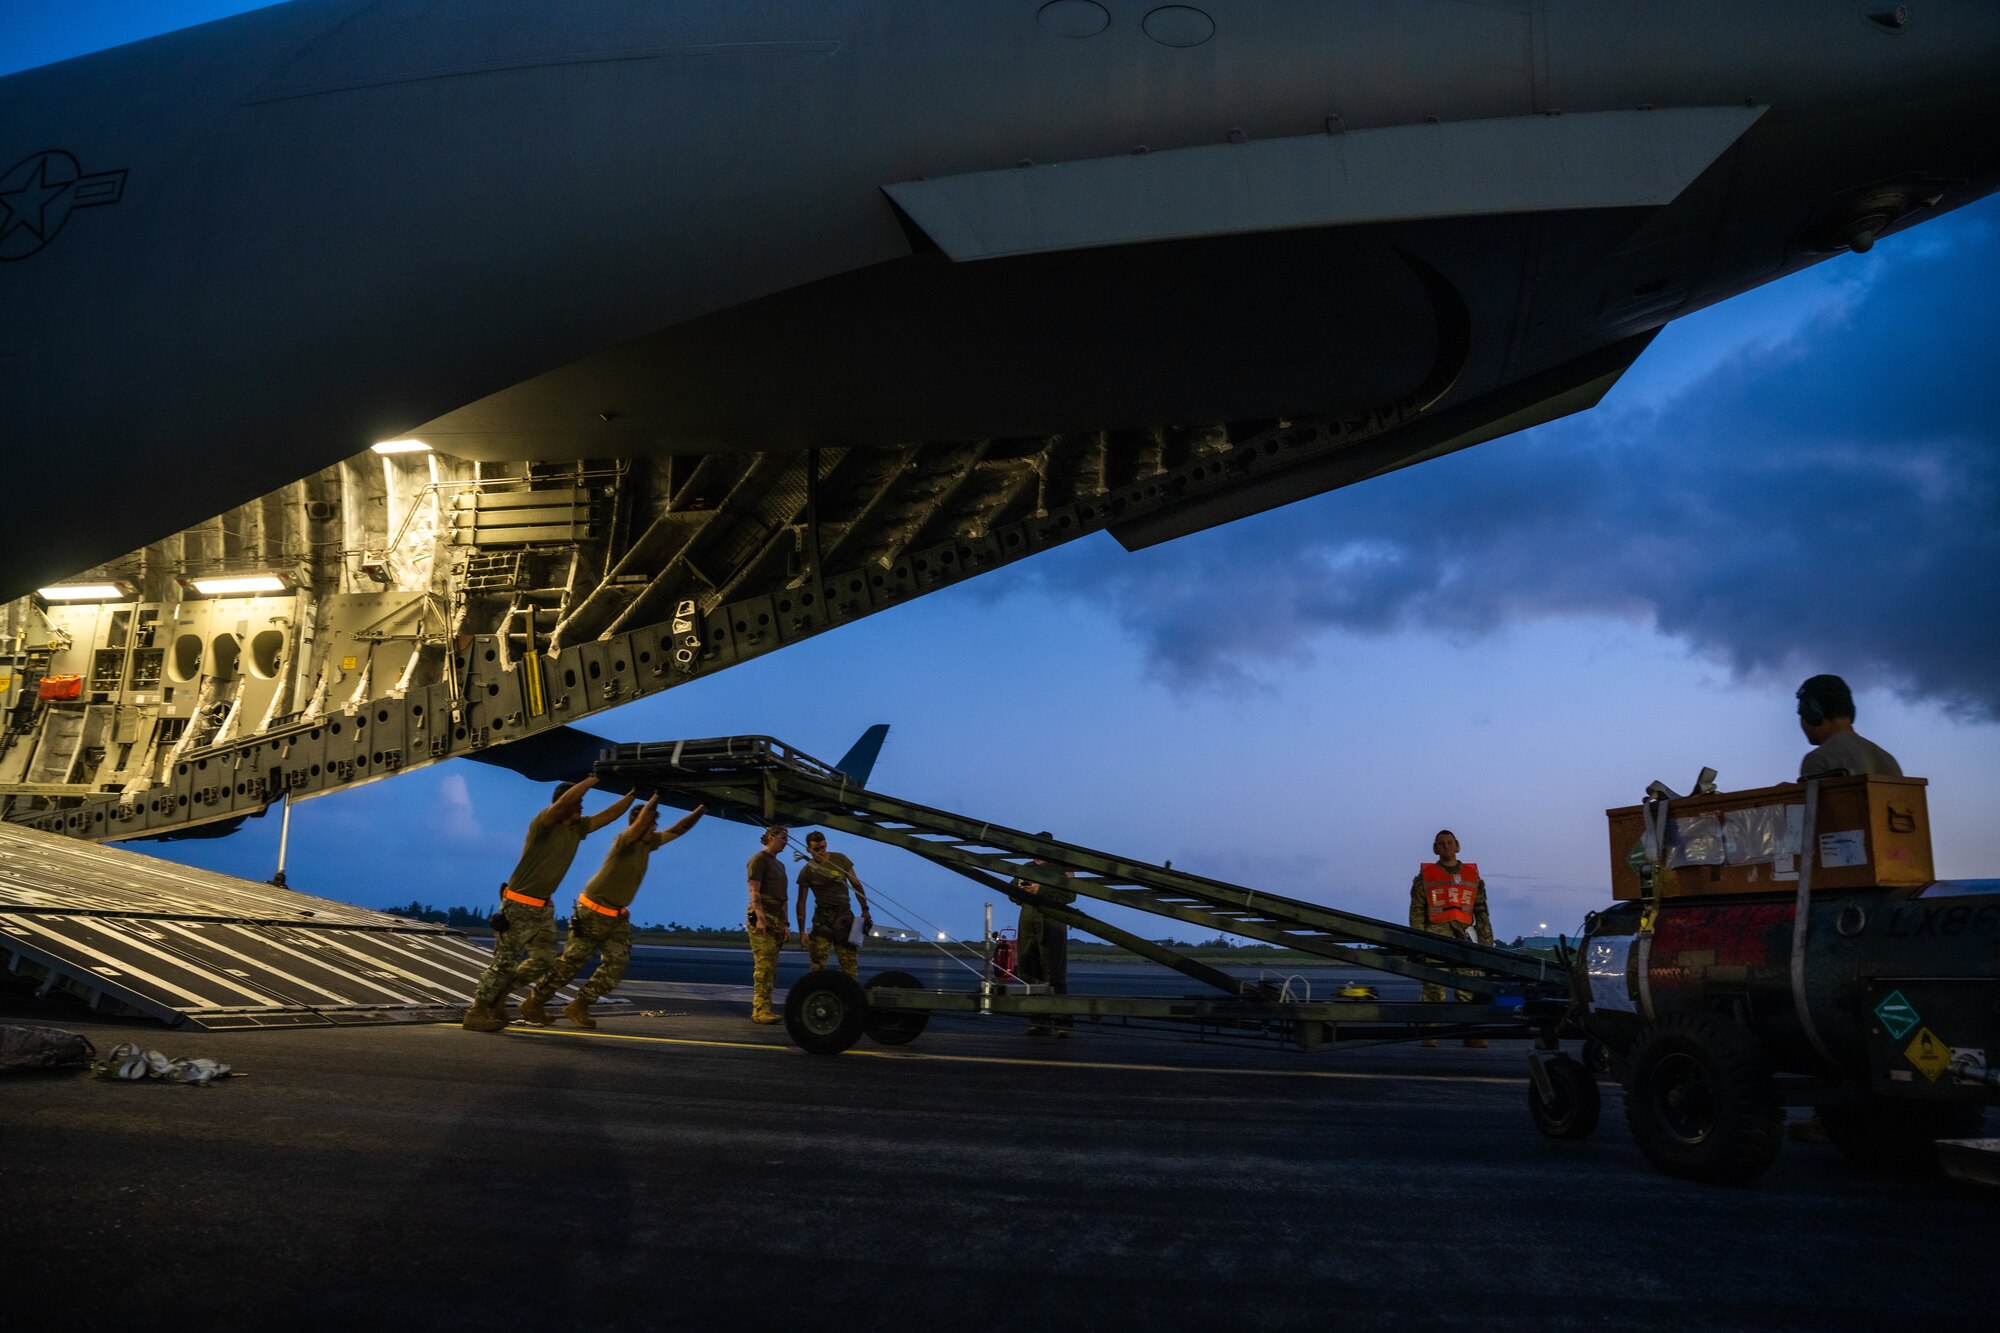 Airmen assigned to the 535th Airlift Squadron and the 735th Air Mobility Squadron load cargo on a C-17 Globemaster III at Joint Base Pearl Harbor-Hickam, Hawaii, during the Joint Base Readiness Exercise, March 1, 2023. The 15th Wing’s ability to surge combat-ready forces across the theater is critical to supporting regional alliances, partnerships and stability. (U.S. Air Force photo by Senior Airman Makensie Cooper)